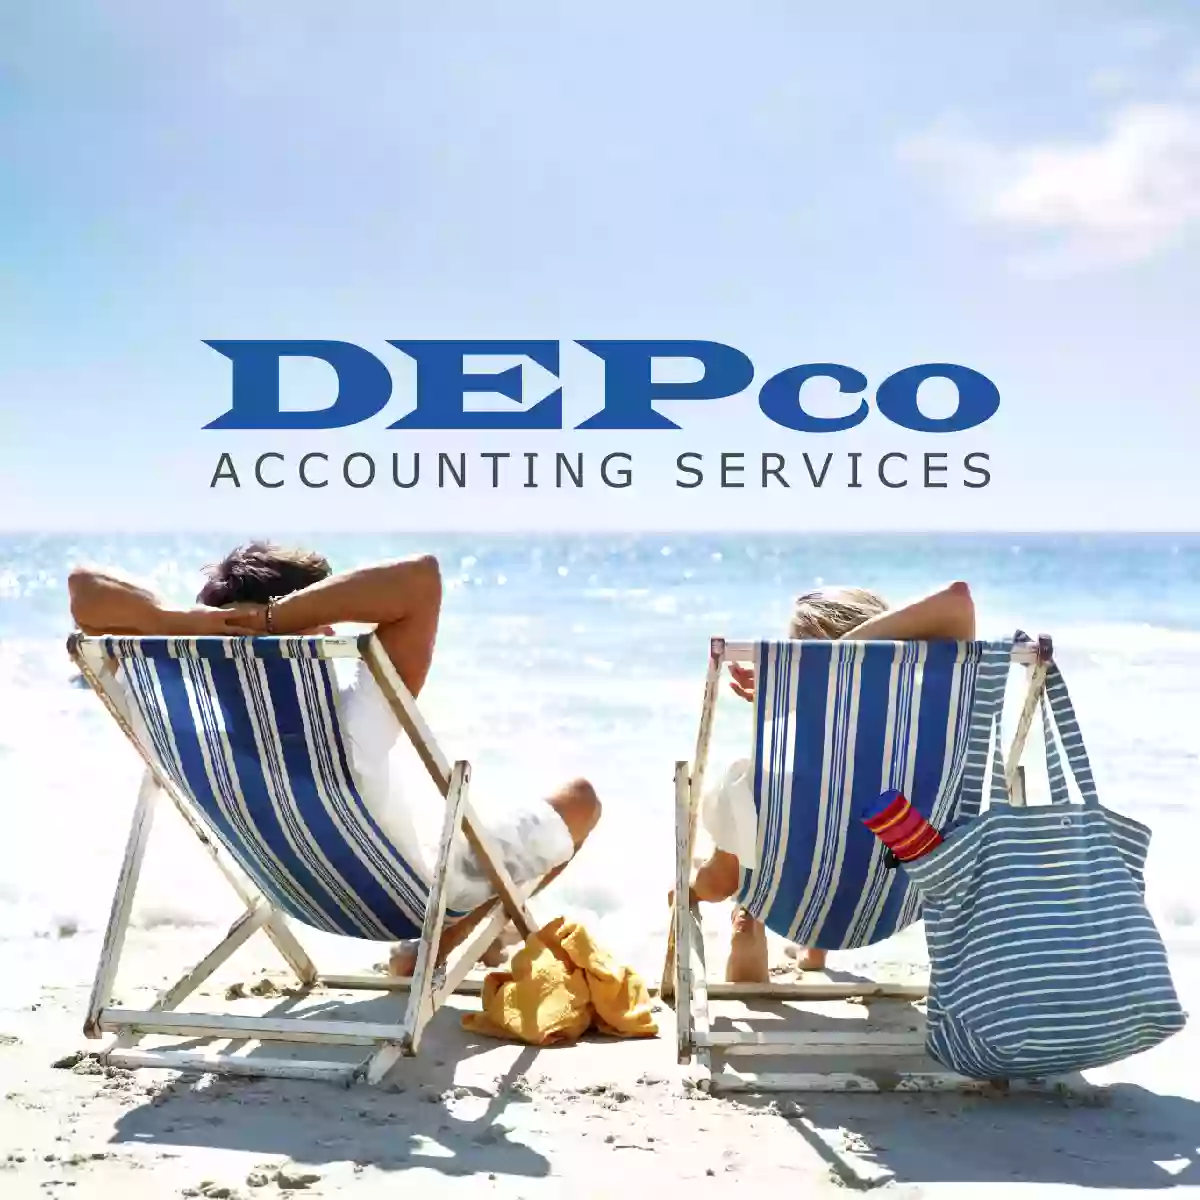 Depco Accounting Services Inc